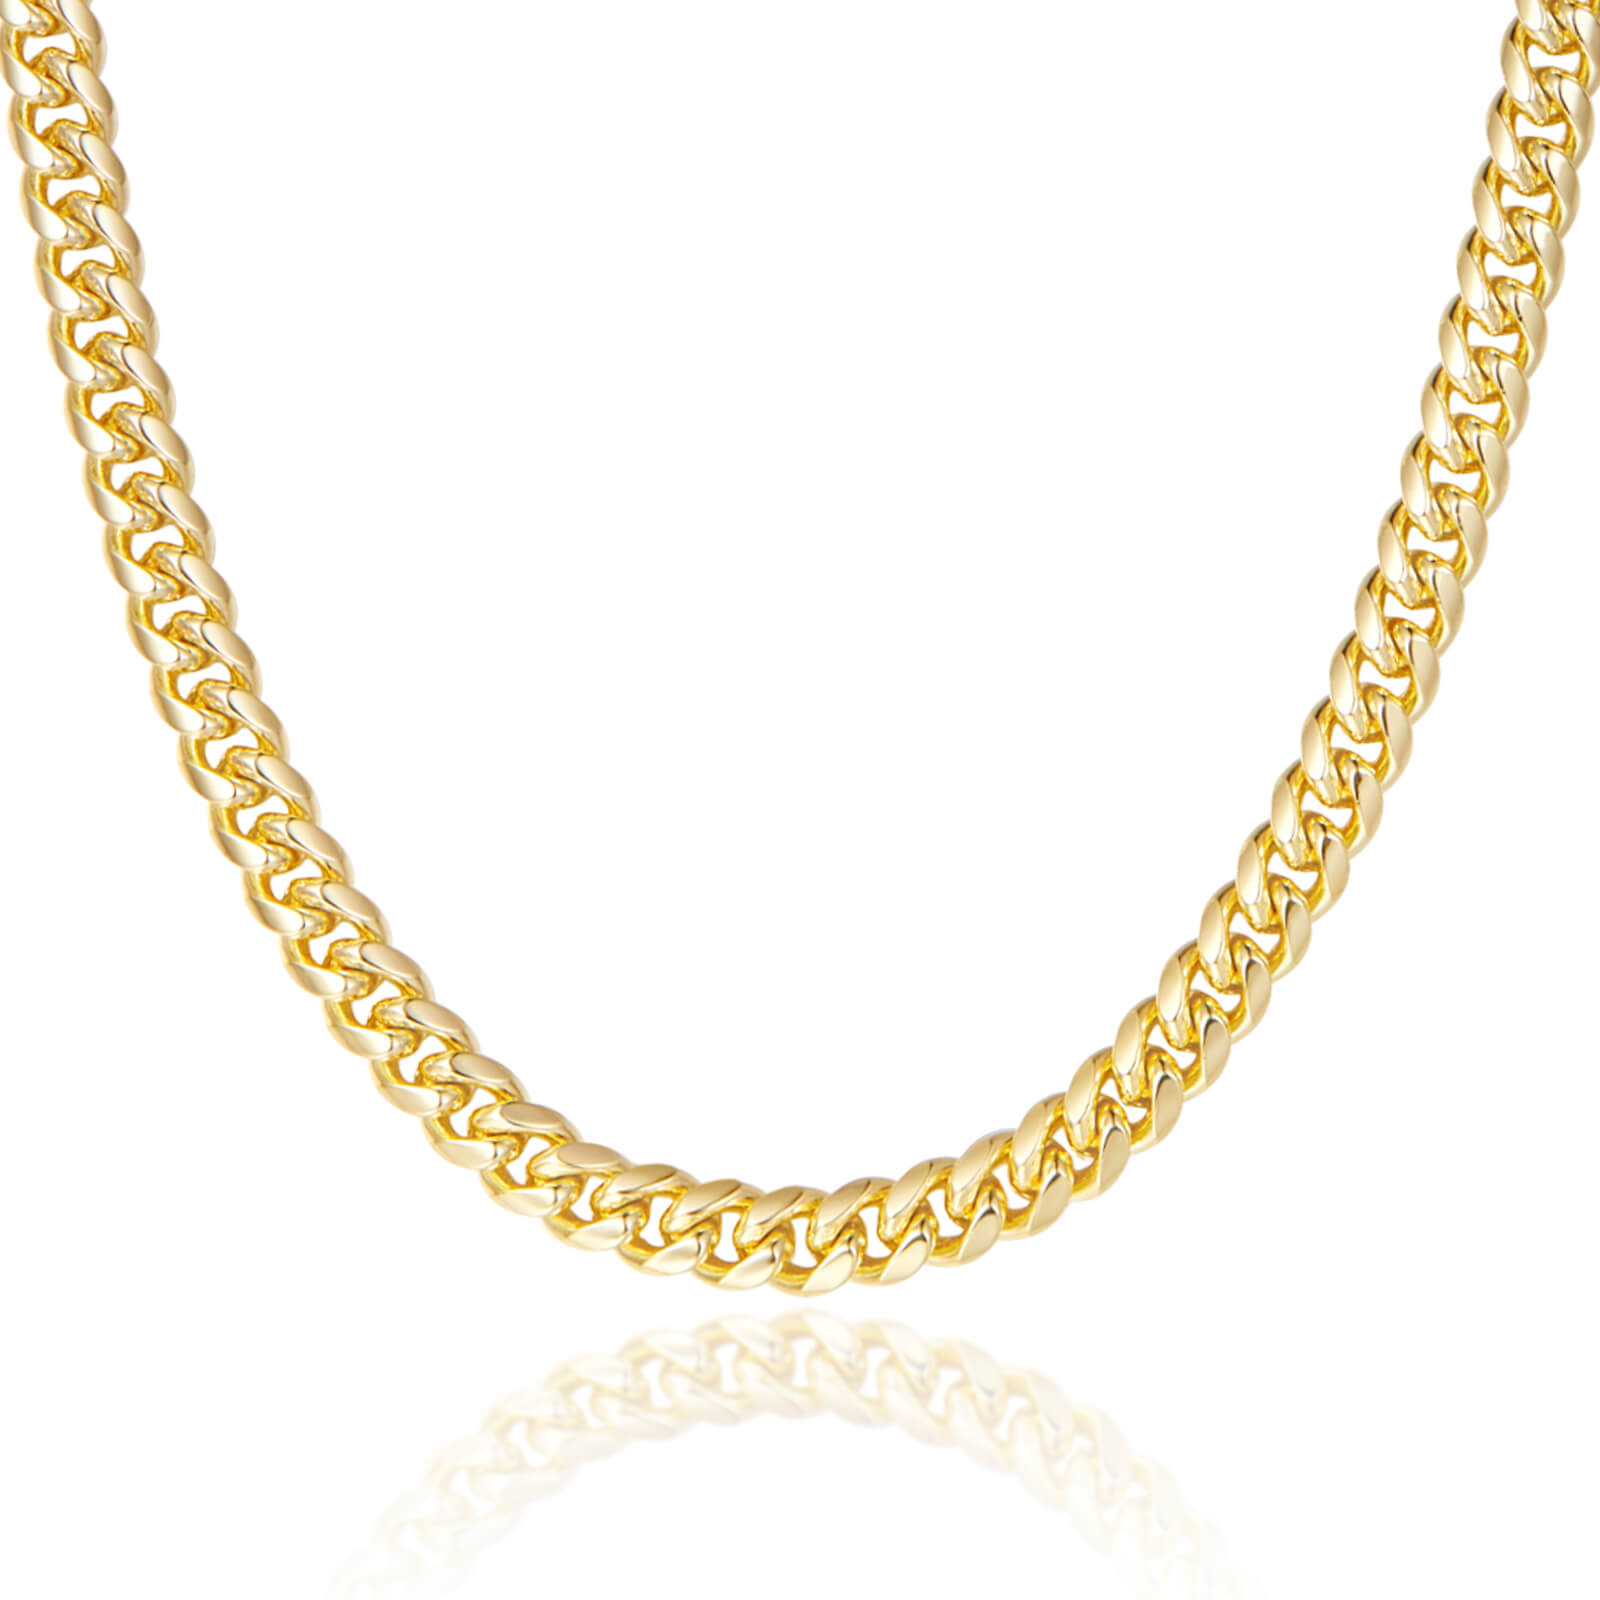 6MM 14K Gold Plated Cuban Link Chain Necklace